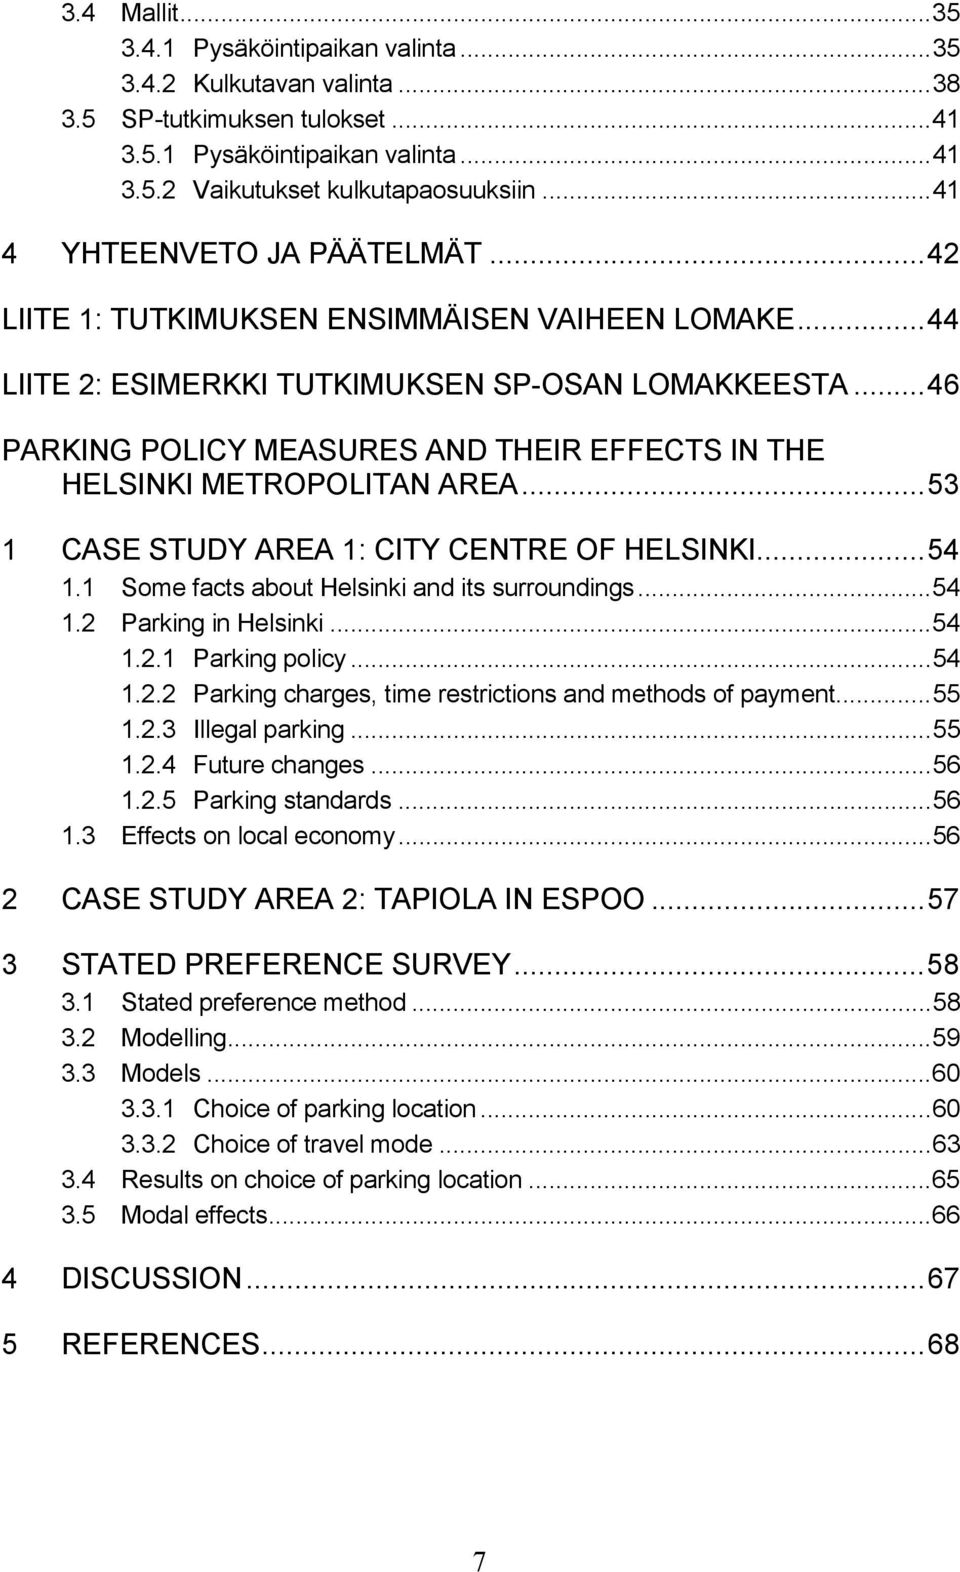 ..46 PARKING POLICY MEASURES AND THEIR EFFECTS IN THE HELSINKI METROPOLITAN AREA...53 1 CASE STUDY AREA 1: CITY CENTRE OF HELSINKI...54 1.1 Some facts about Helsinki and its surroundings...54 1.2 Parking in Helsinki.